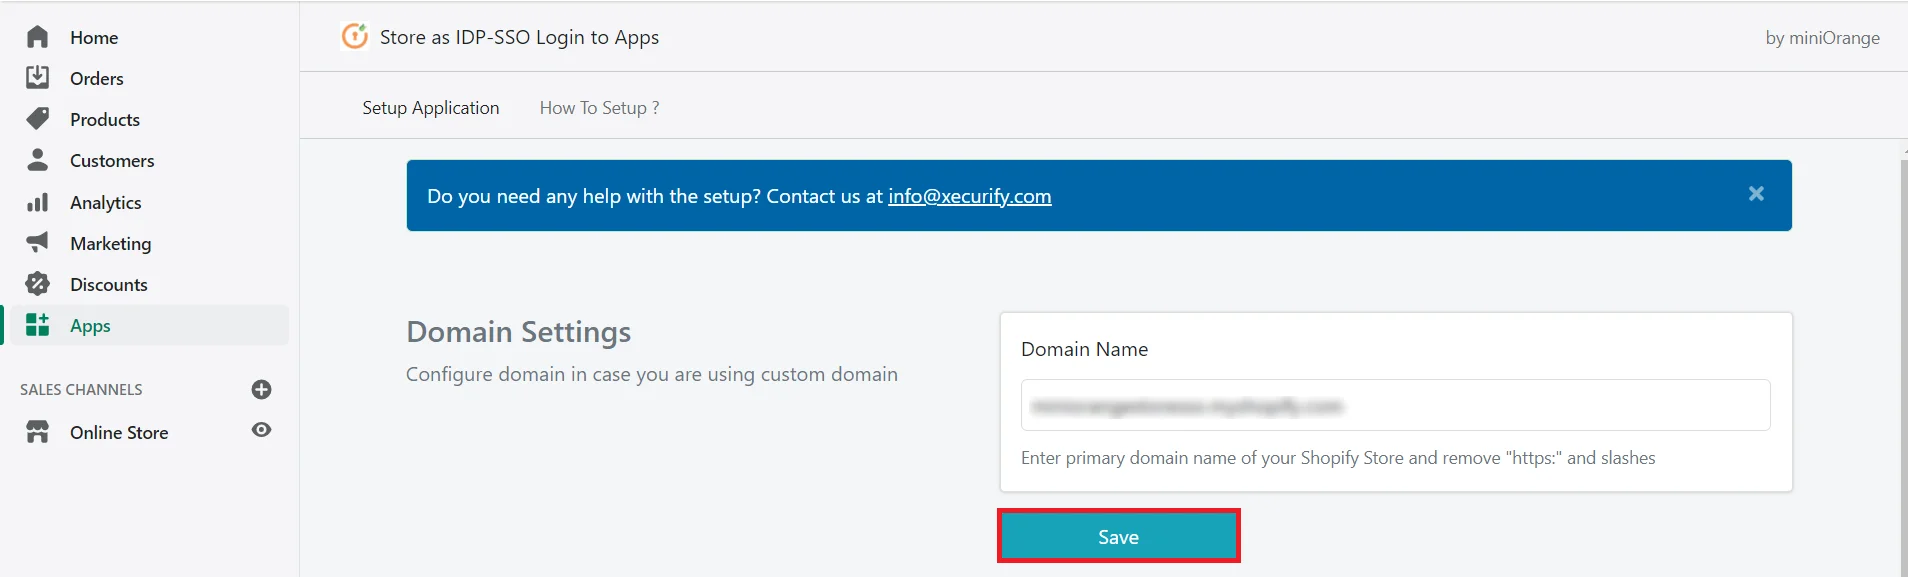 Shopify Single Sign-On (SSO) in Tribe  oauth provider save